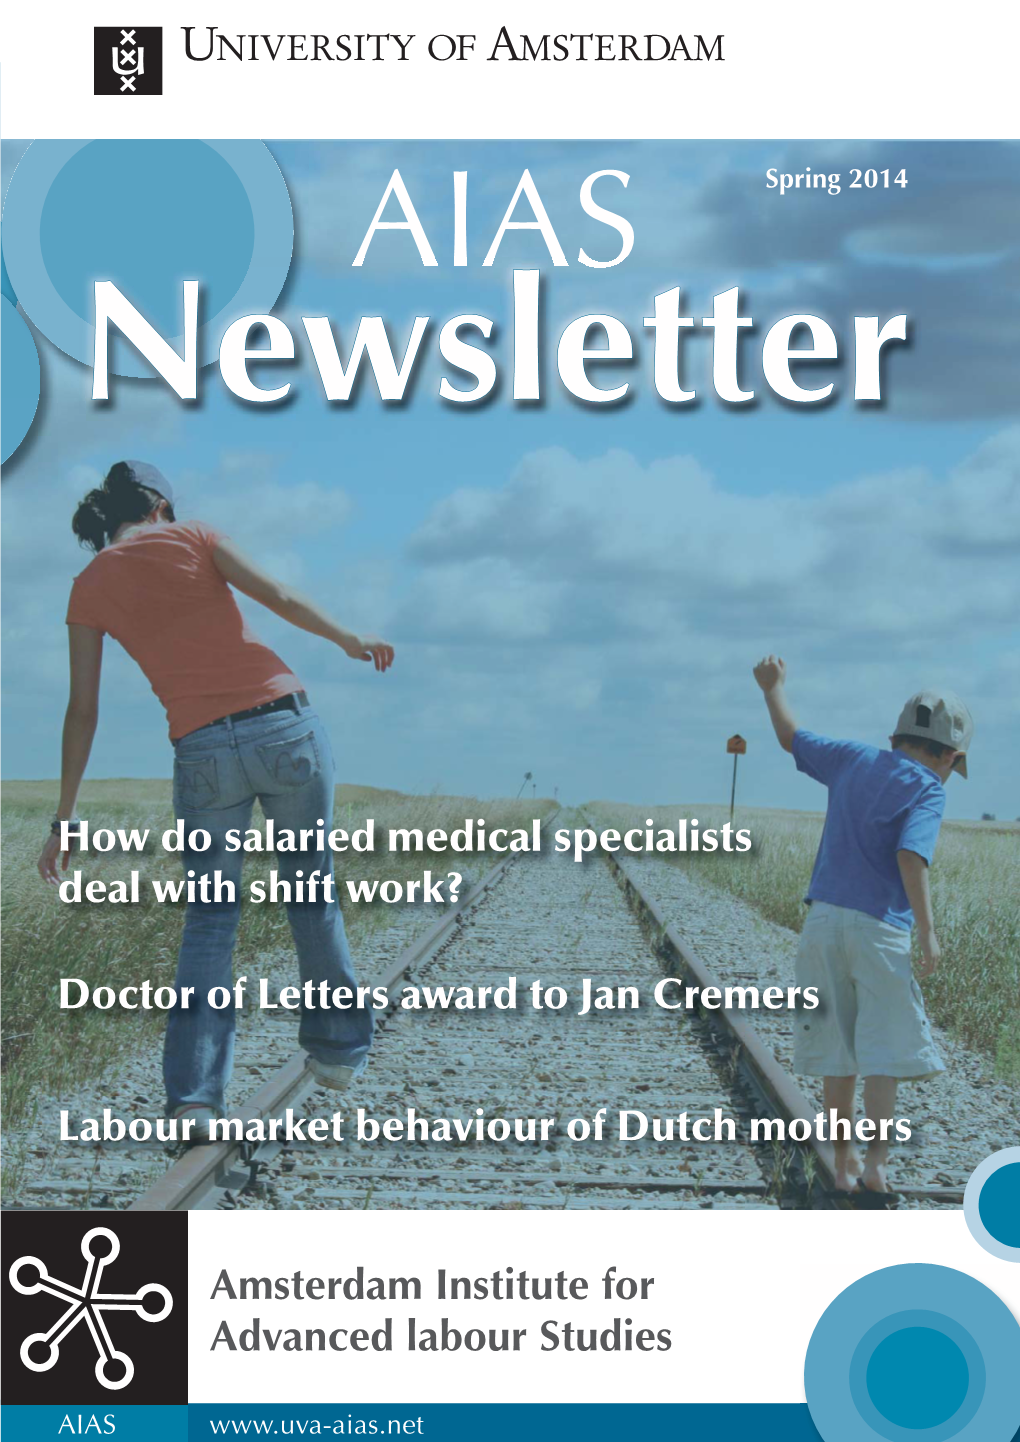 AIAS Newsletter Spring 2014 Voor Op Site.Indd 1 16-4-2014 14:29:04 Amsterdam Institute AIAS for Advanced Labour Studies